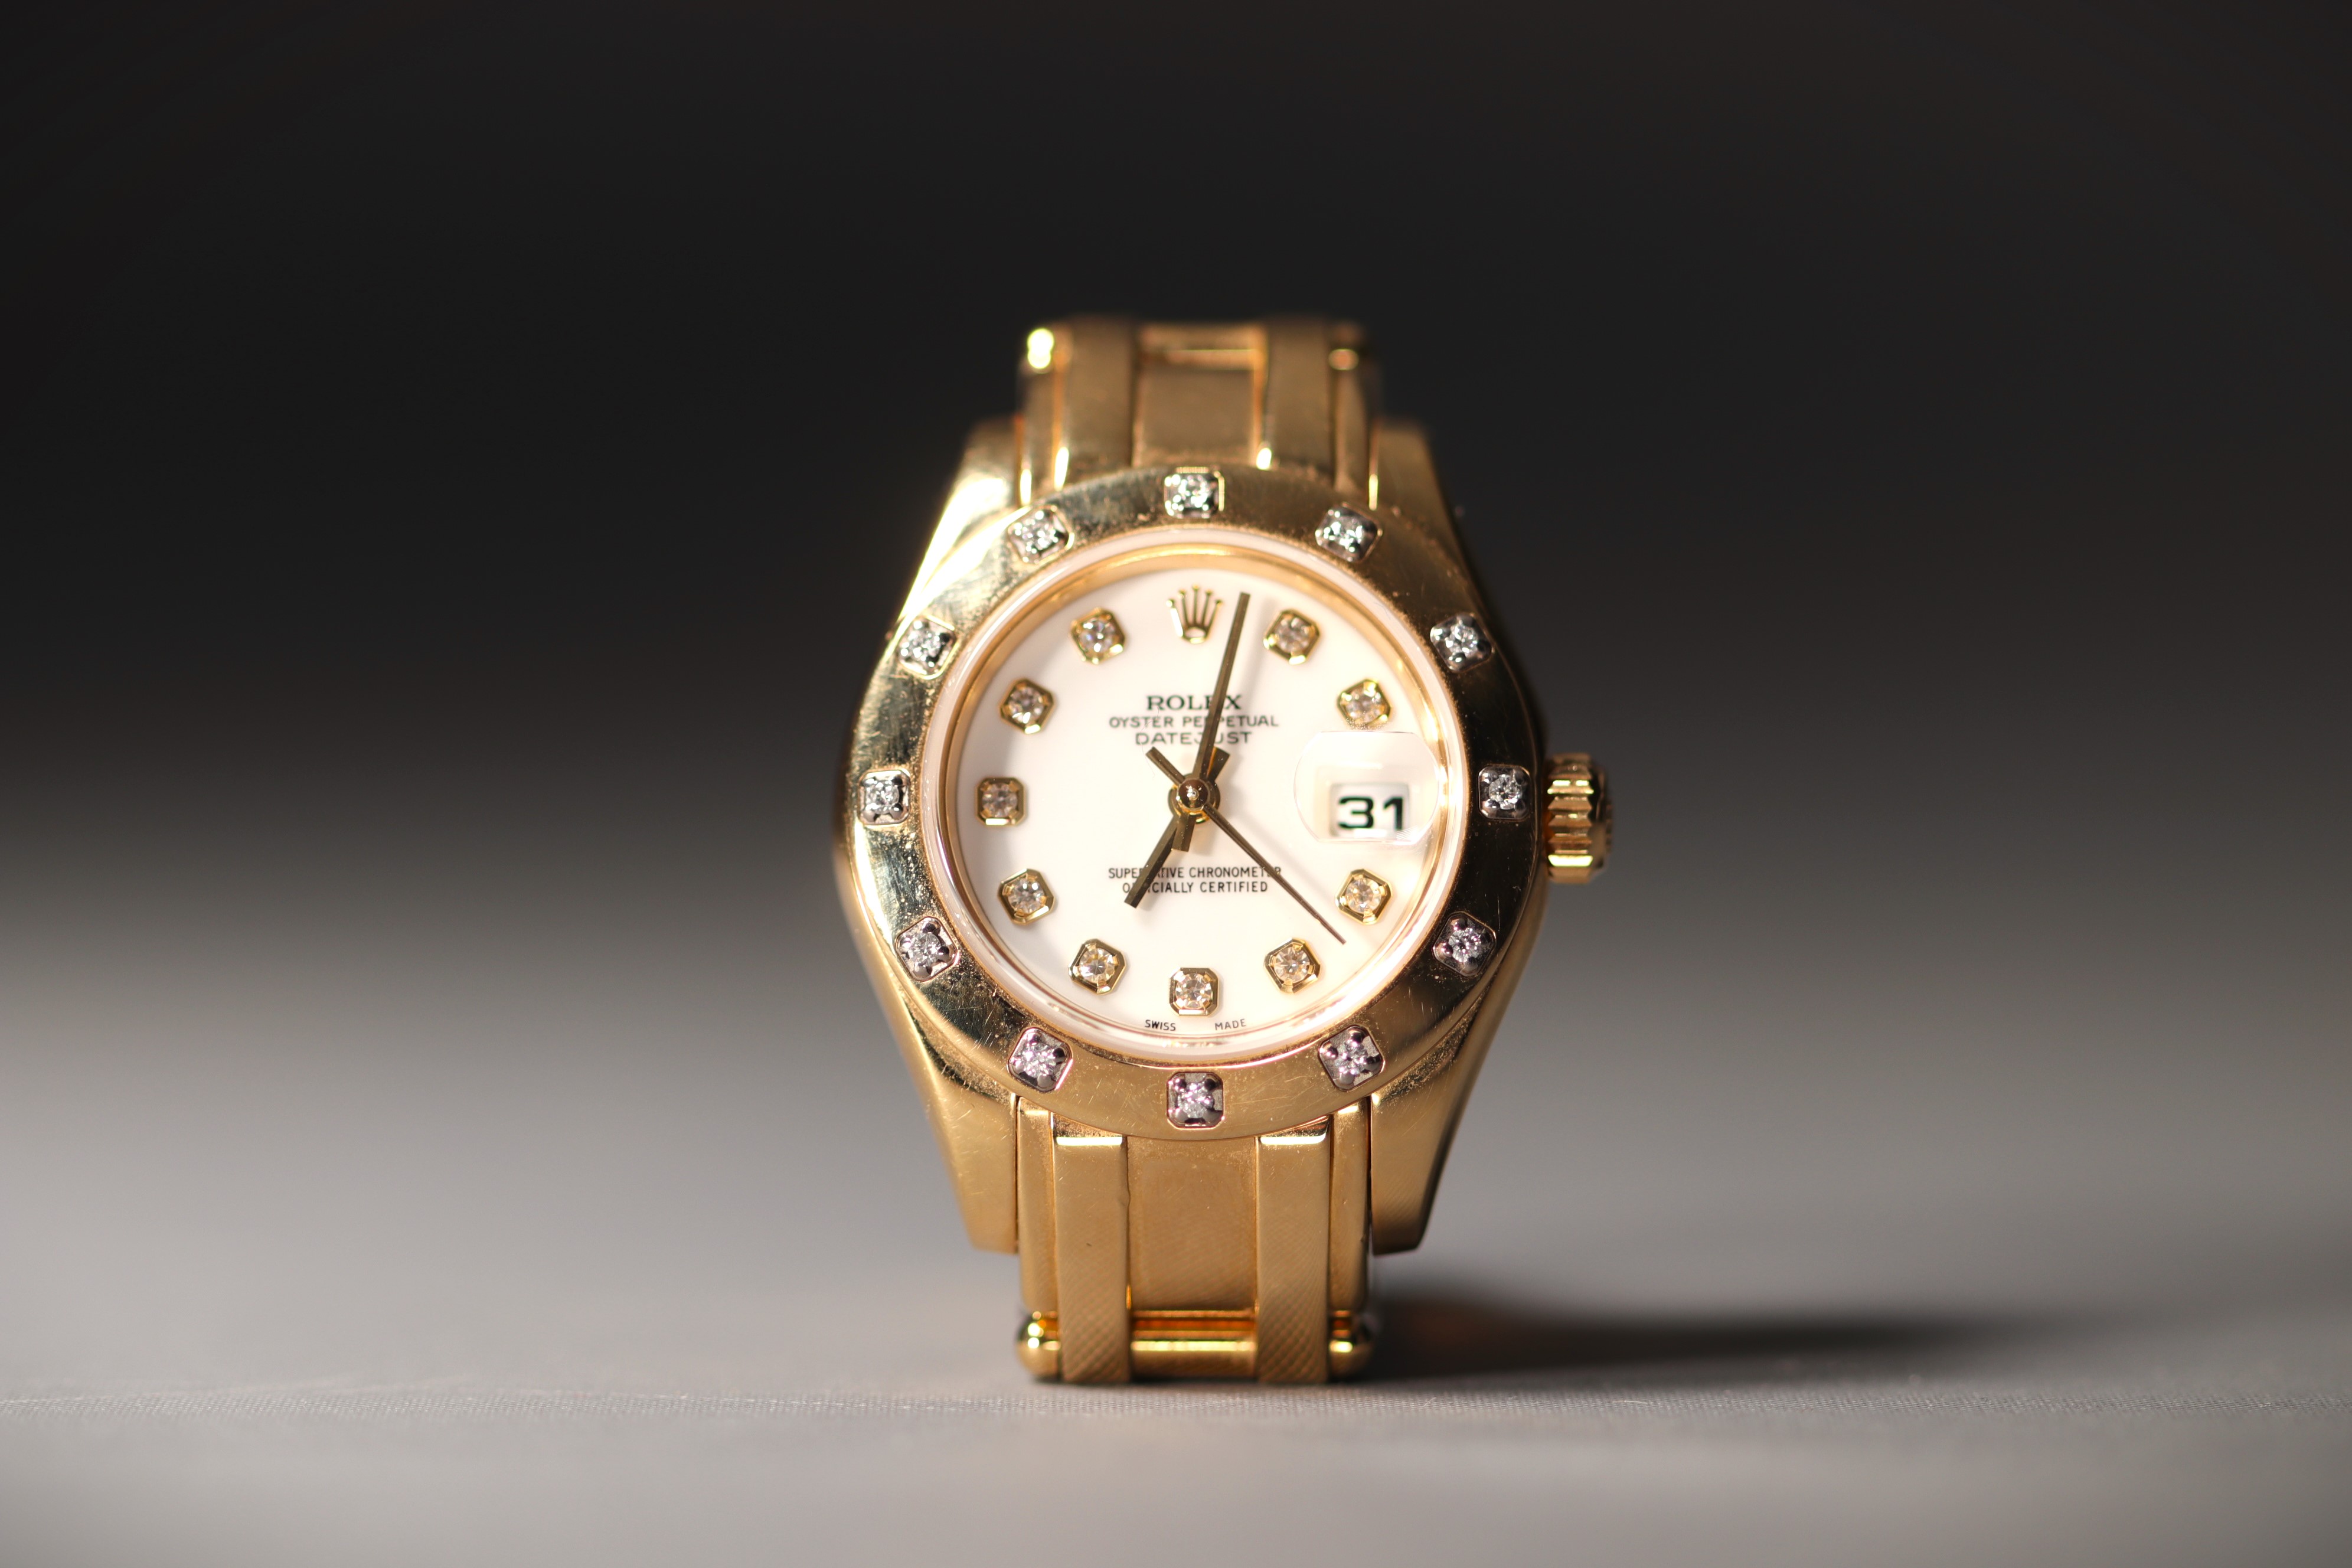 Rolex "Pearlmaster" Oyster Date Perpetual (80318) in 18k yellow gold and diamonds, box and paper, ye - Image 2 of 5